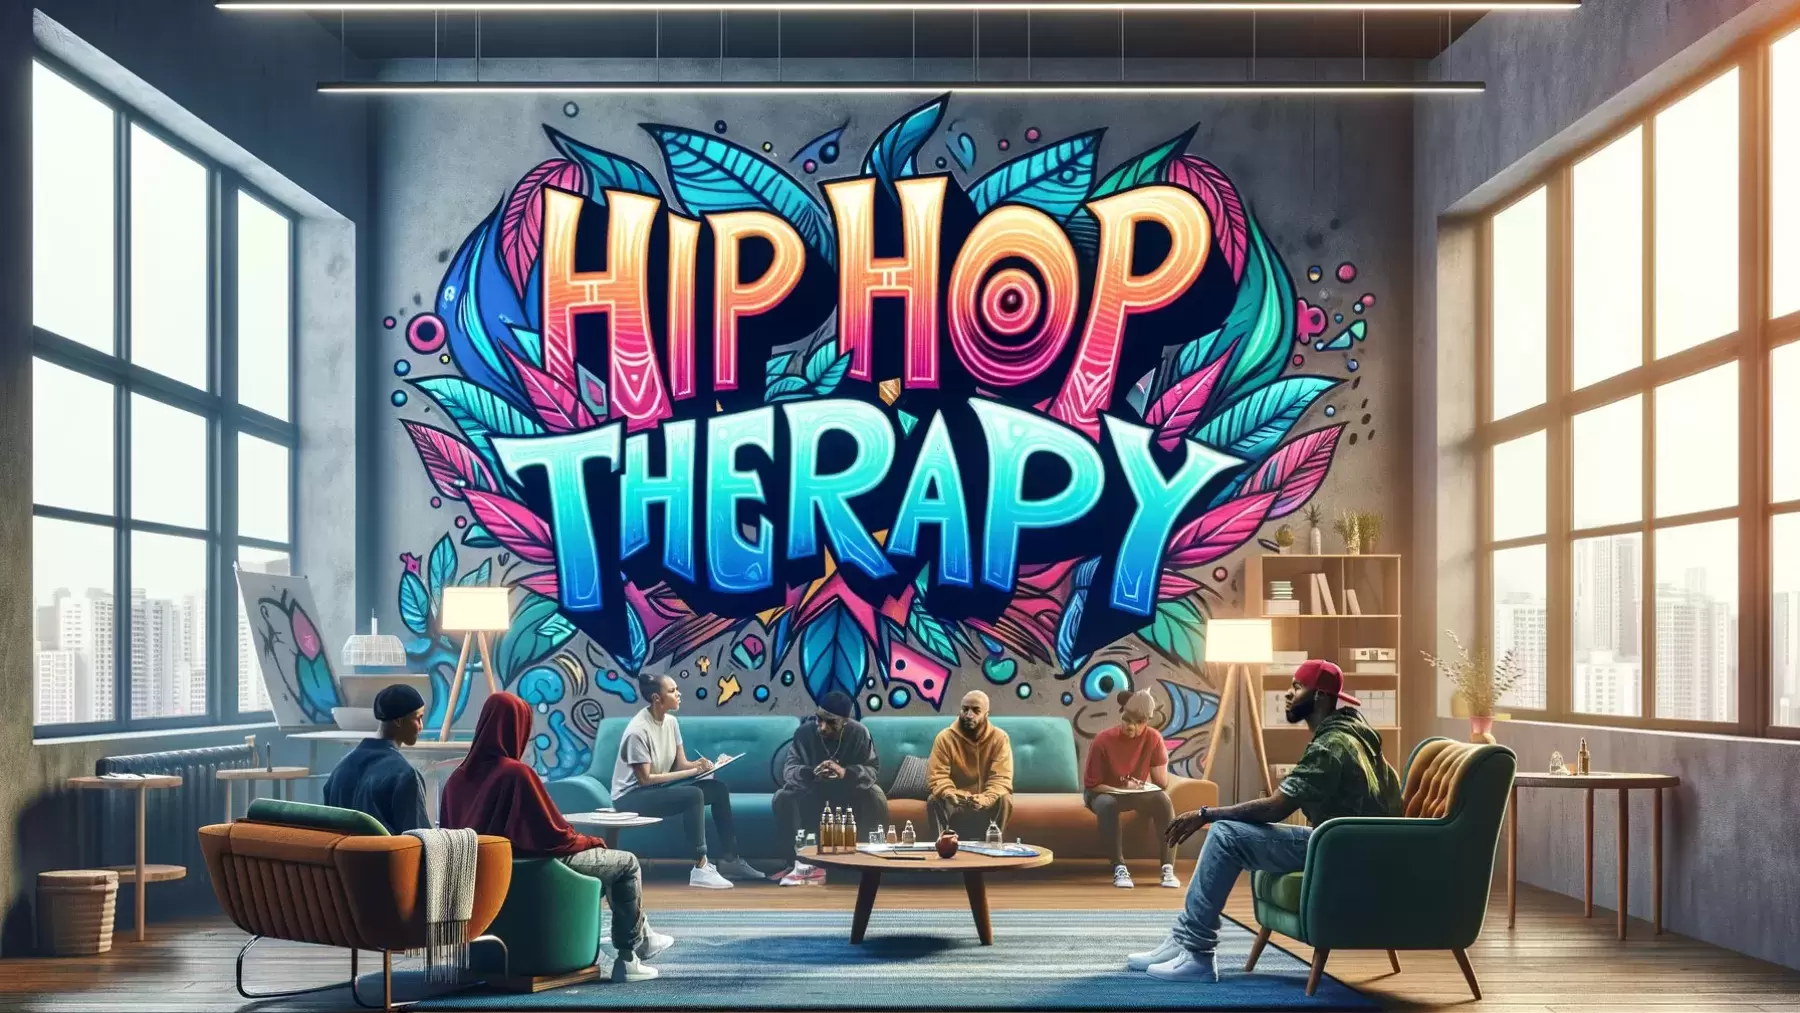 Hip Hop Therapy is painted in graffiti style on a concrete wall while people sit around on couches talking in front of it